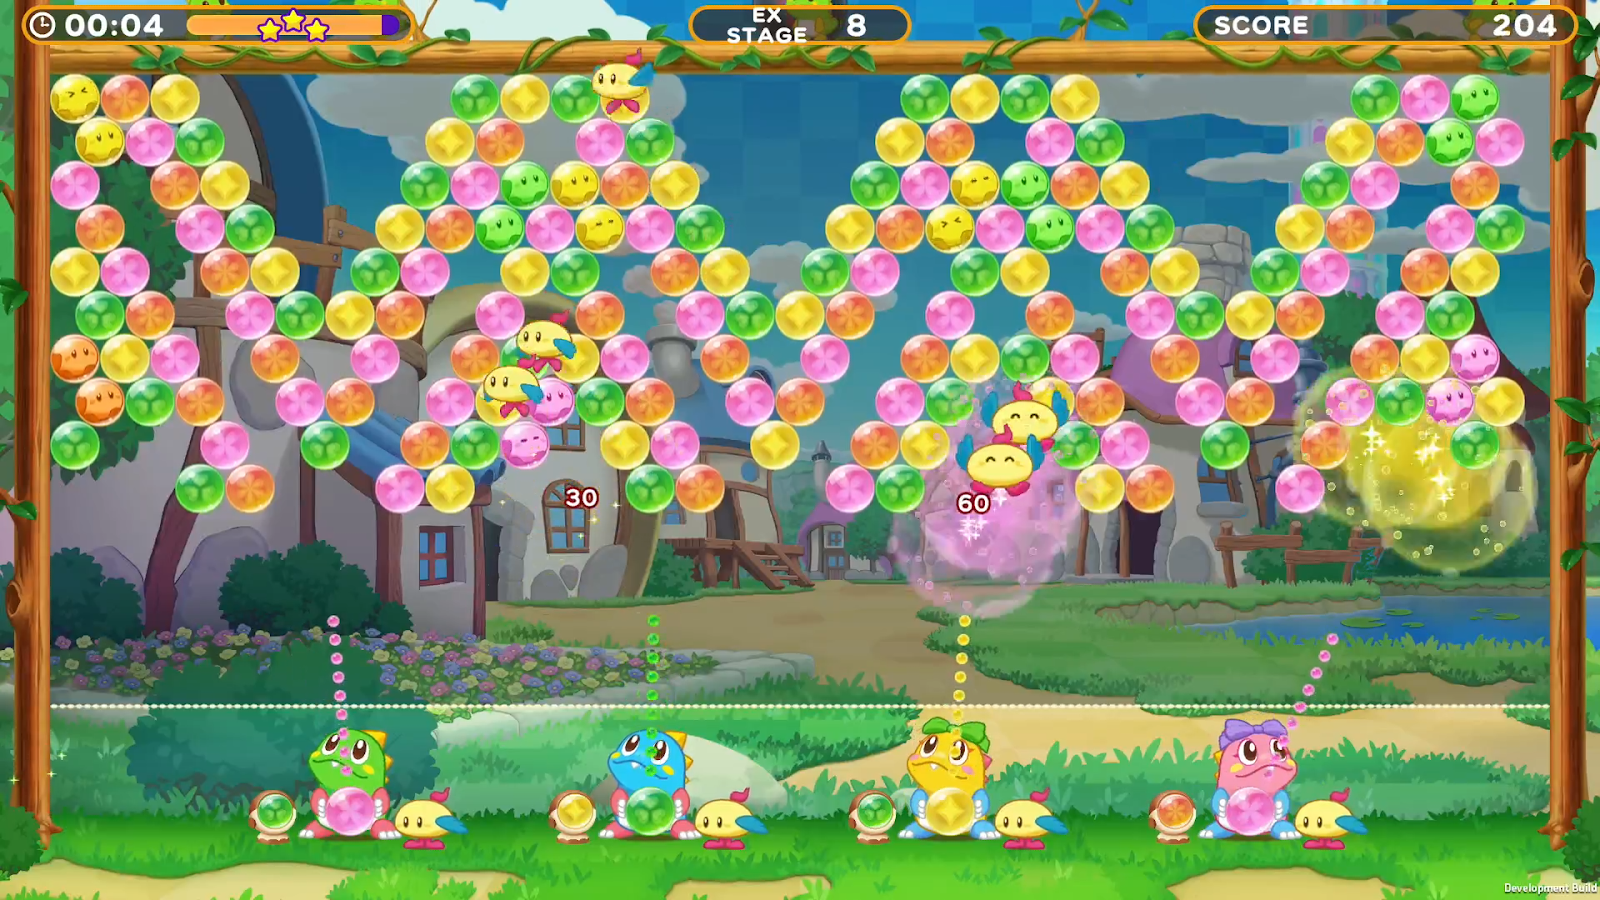 Four player mode shown, with four adorable dragons battling it out and lots of colourful bubbles!